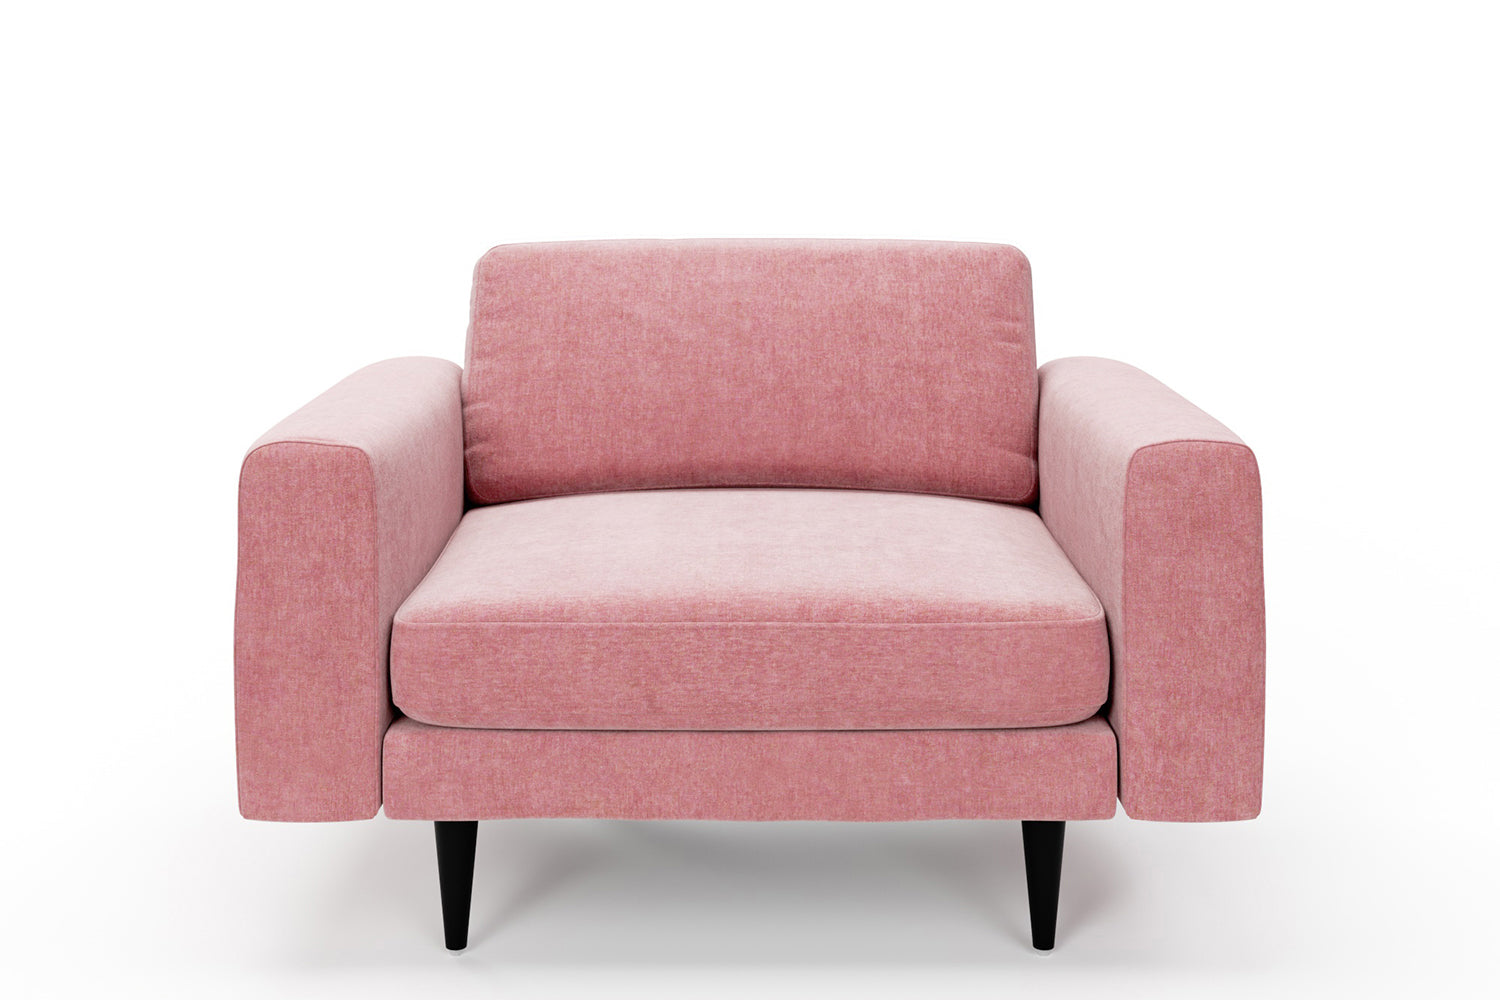 SNUG | The Big Chill 1.5 Seater Snuggler in Blush Coral variant_40621892304944